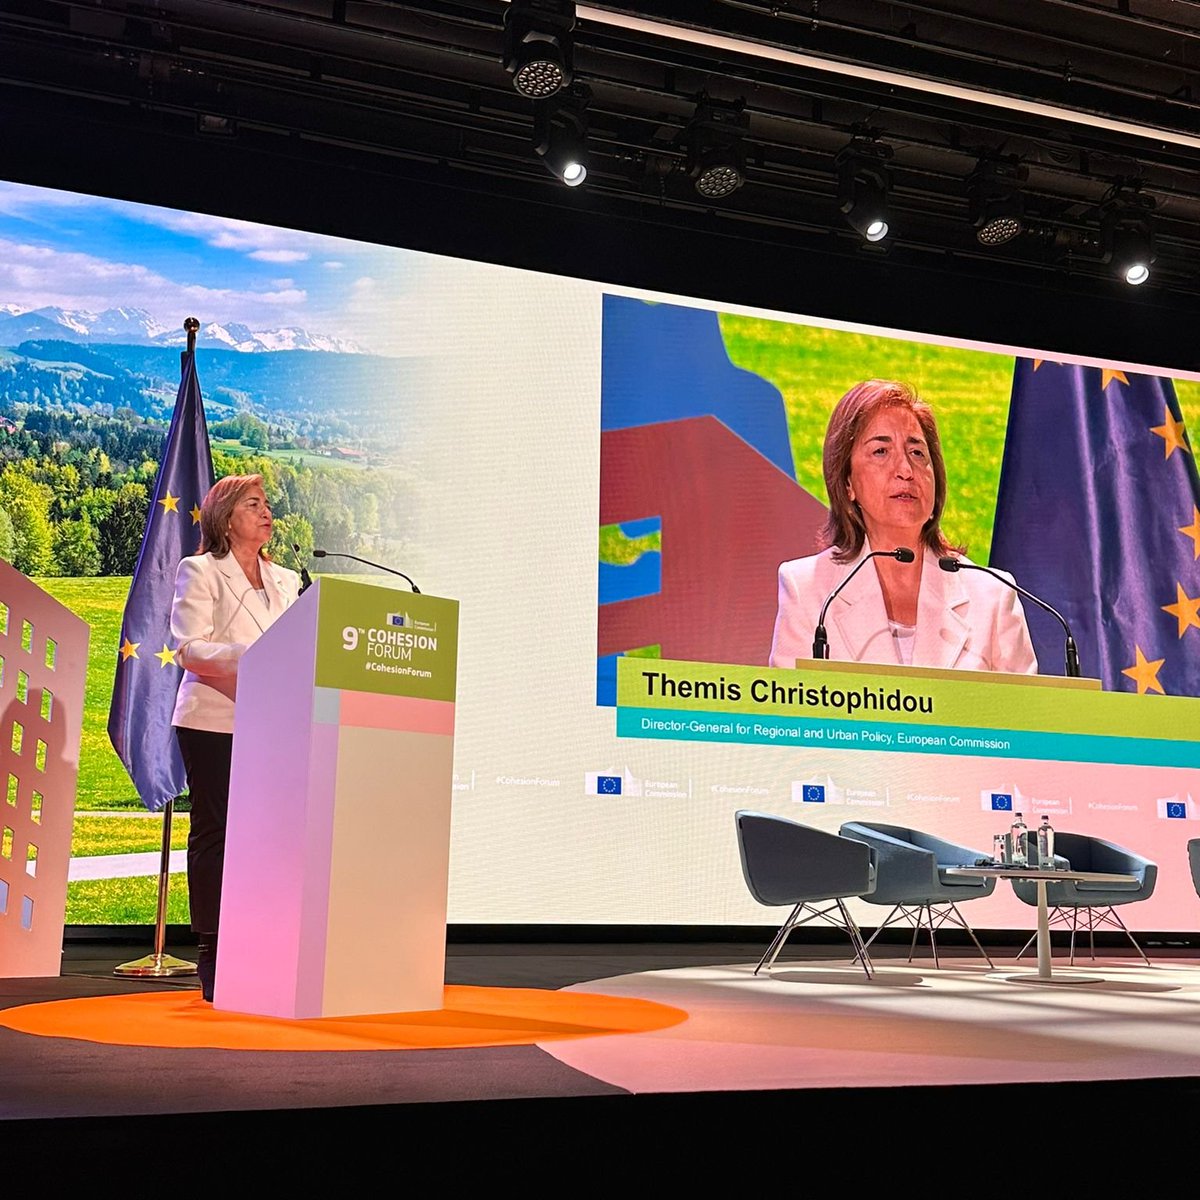 Director-General @ChristophidouEU  addresses the welcome speech to a full room in Brussels for the #CohesionForum.

“#CohesionPolicy is needed more than ever; today and tomorrow we take the debate to the next level”